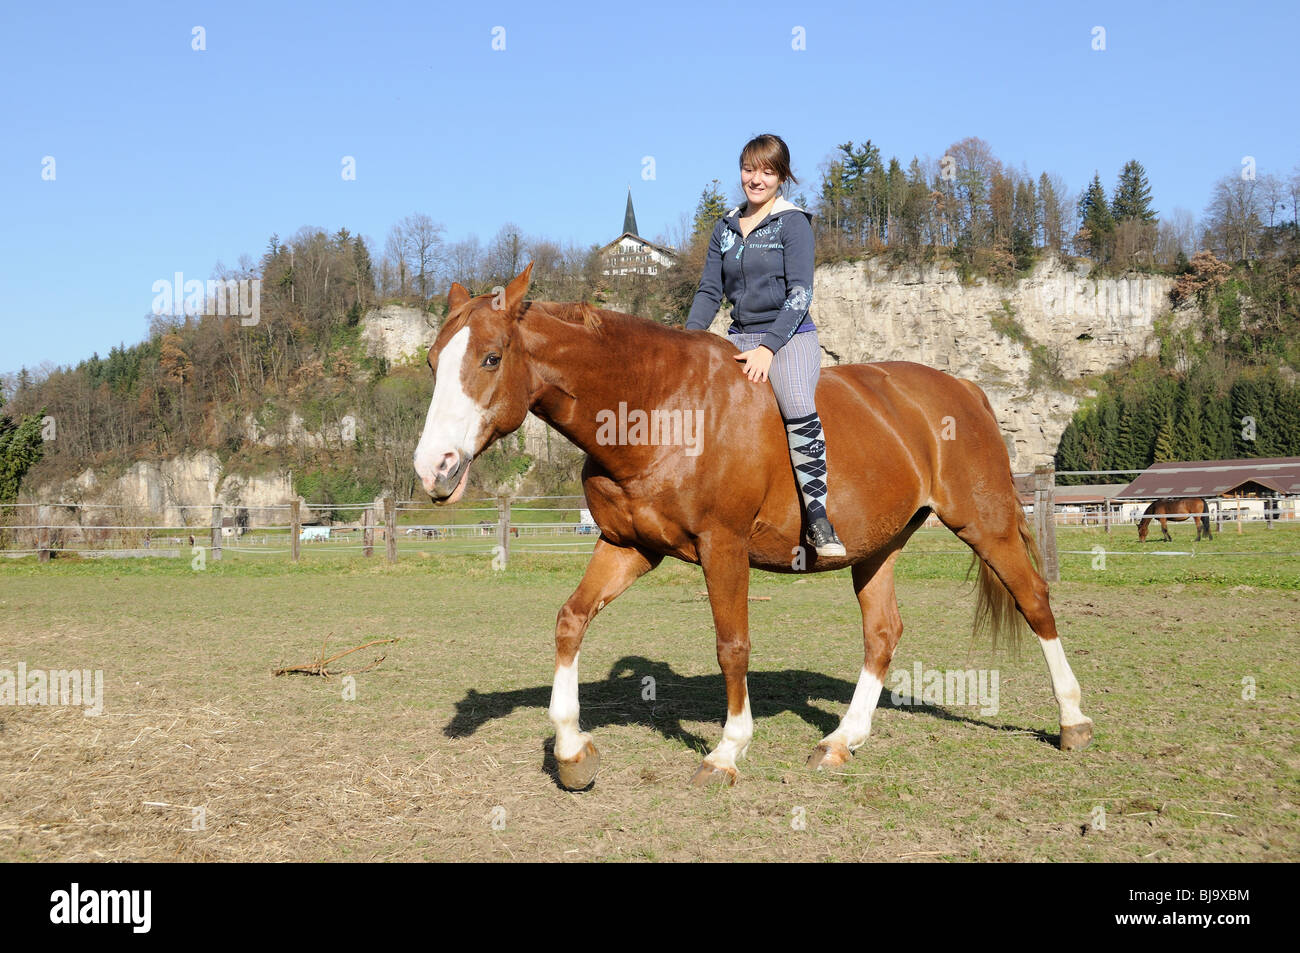 horsebackriding girl on meadow without saddle and without bridle Stock Photo